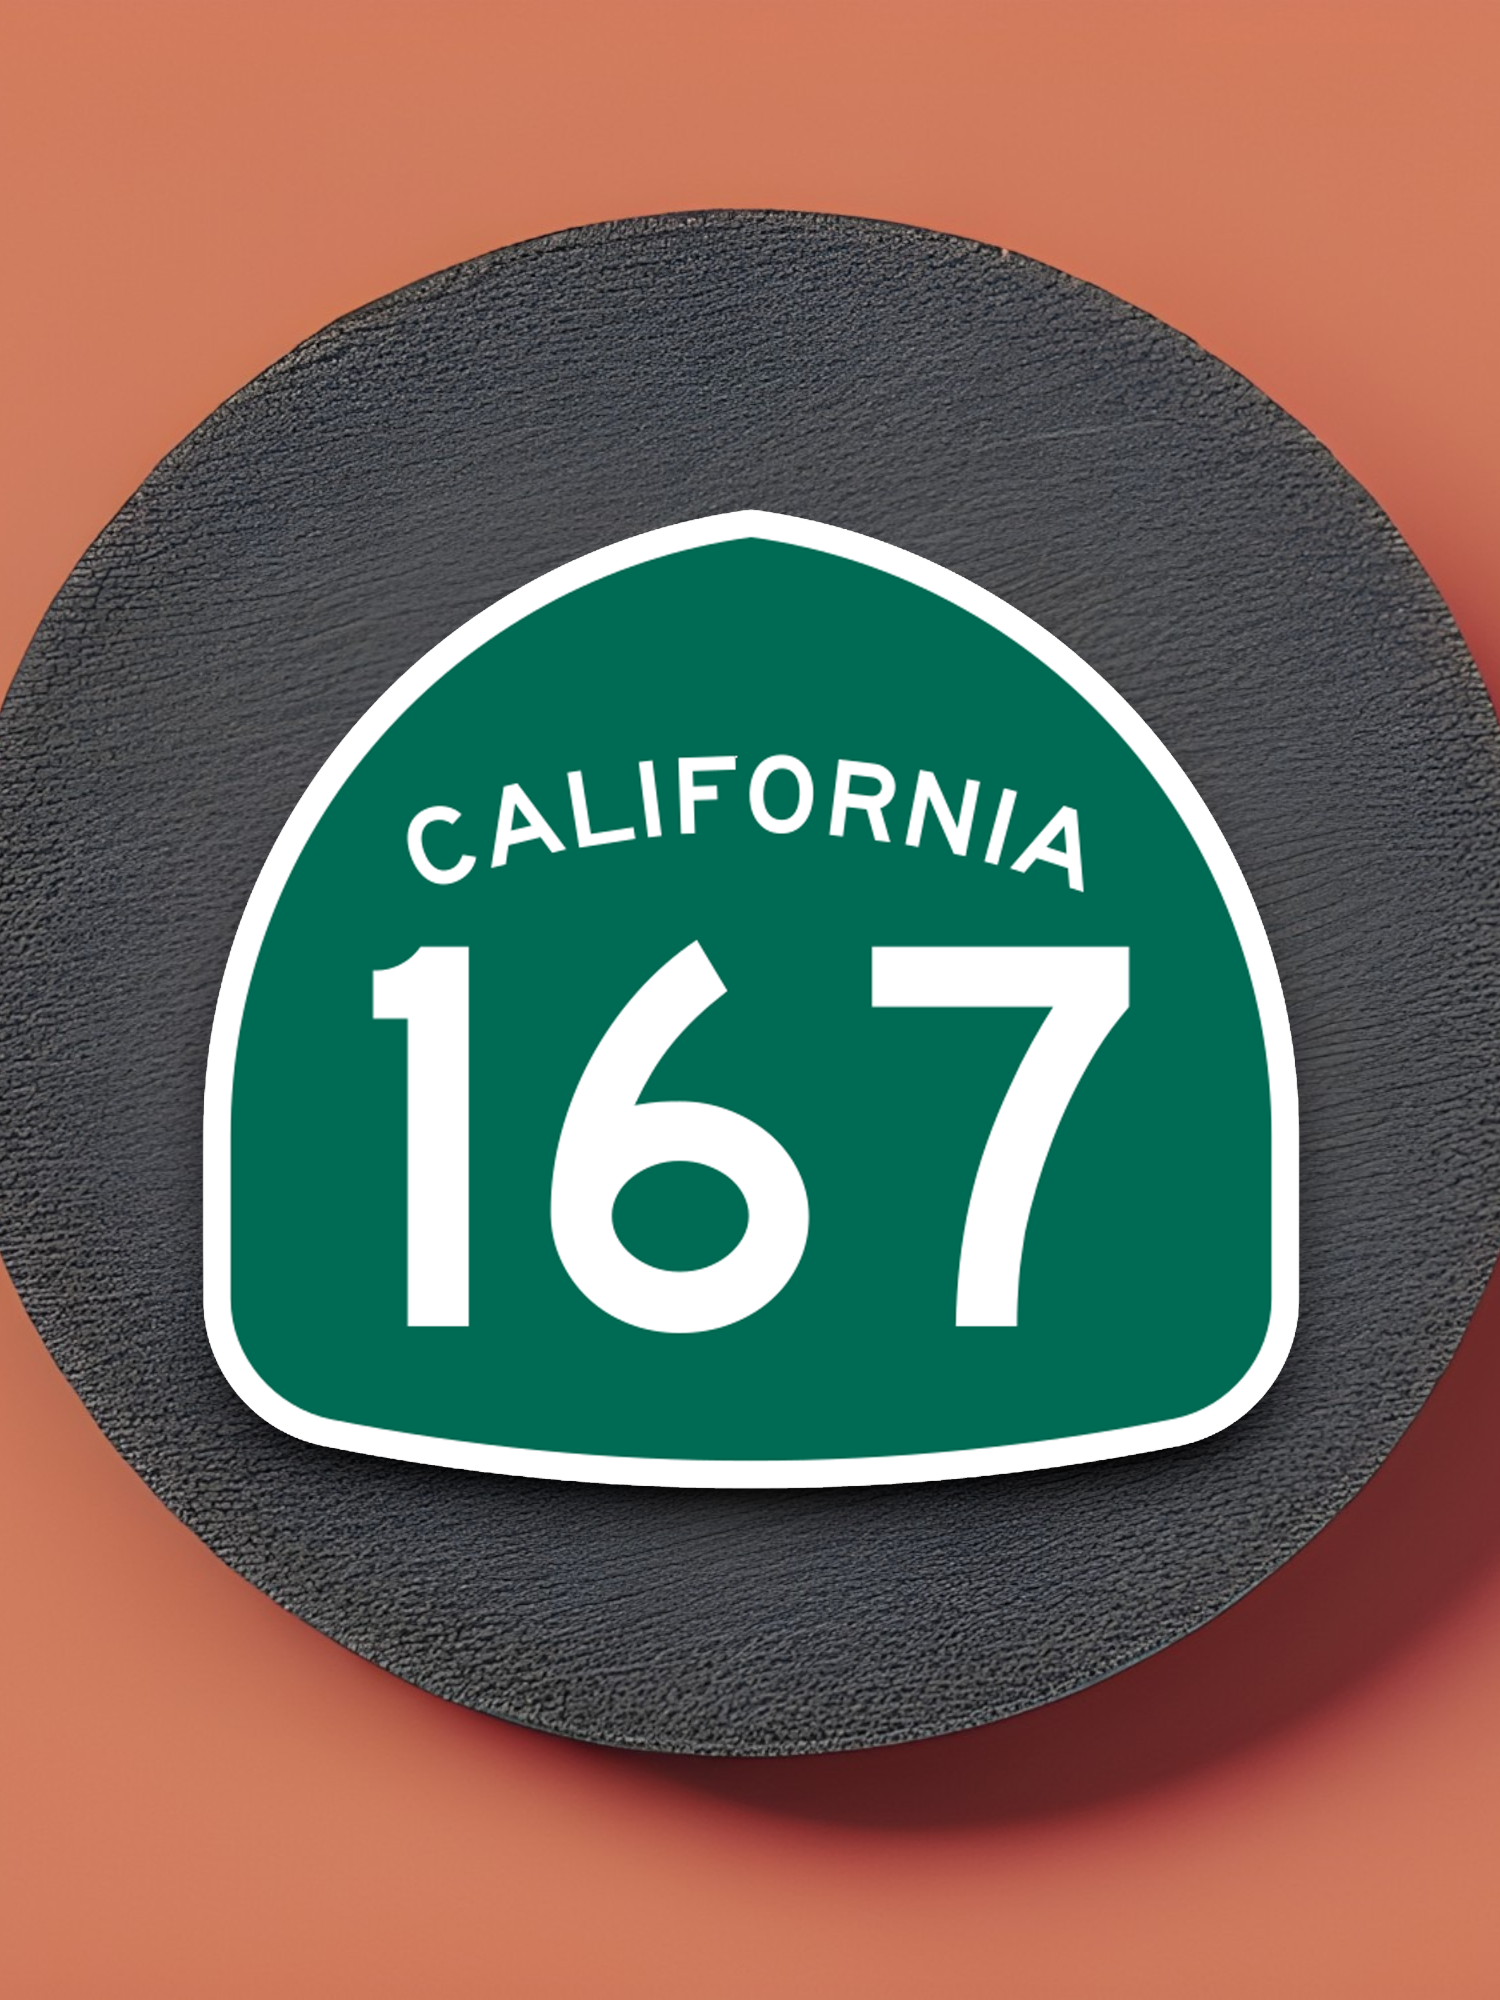 California State Route 167 Road Sign Sticker